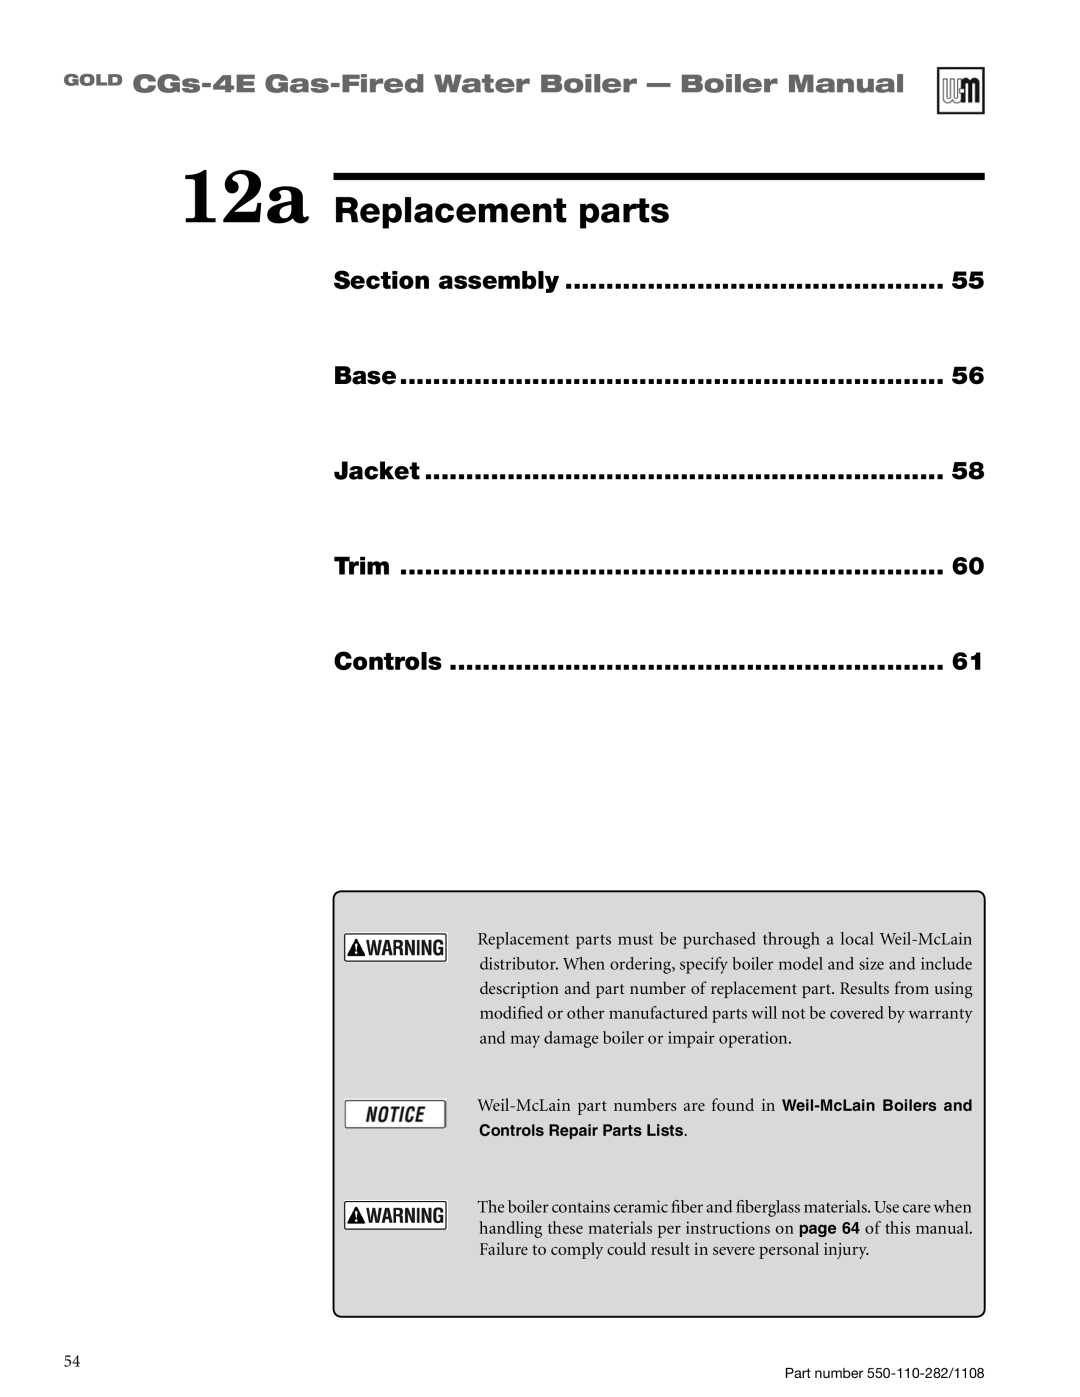 Weil-McLain CGS-4E manual 12a Replacement parts, Section assembly, Base, Jacket, Trim, Controls 